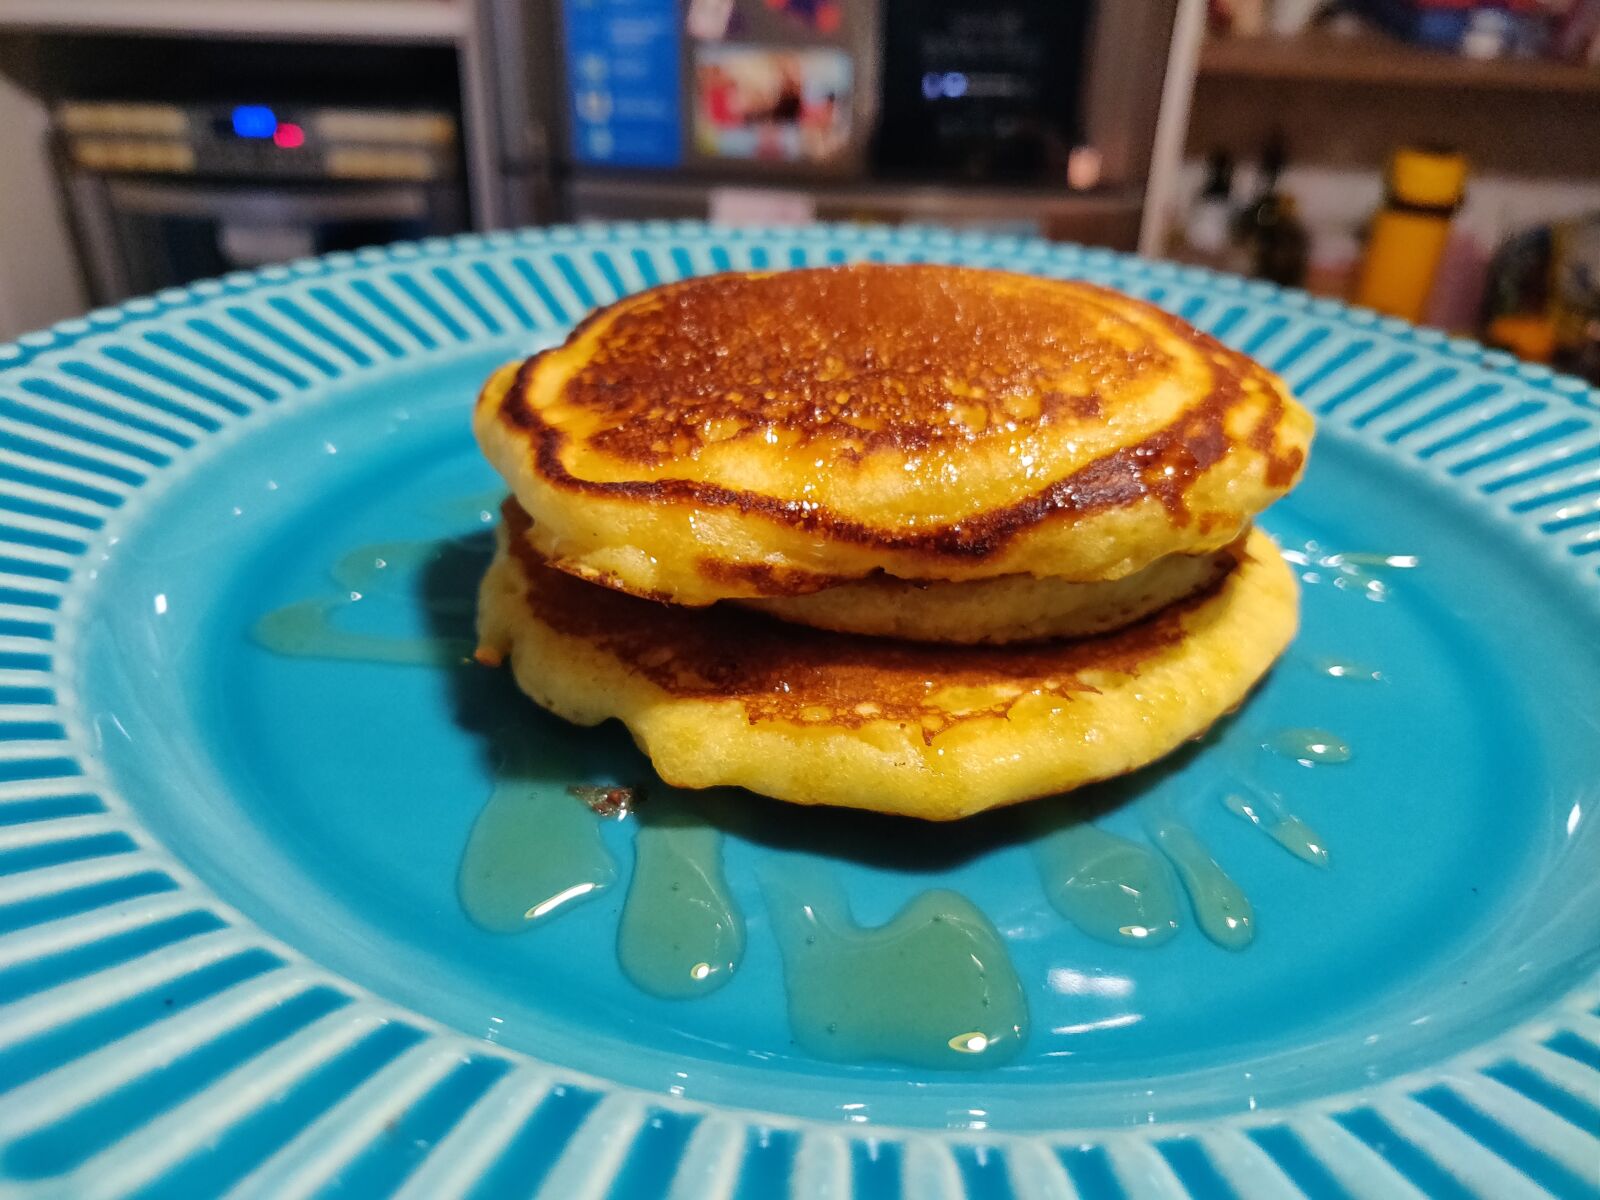 OnePlus A6003 sample photo. Pancakes, breakfast, food photography